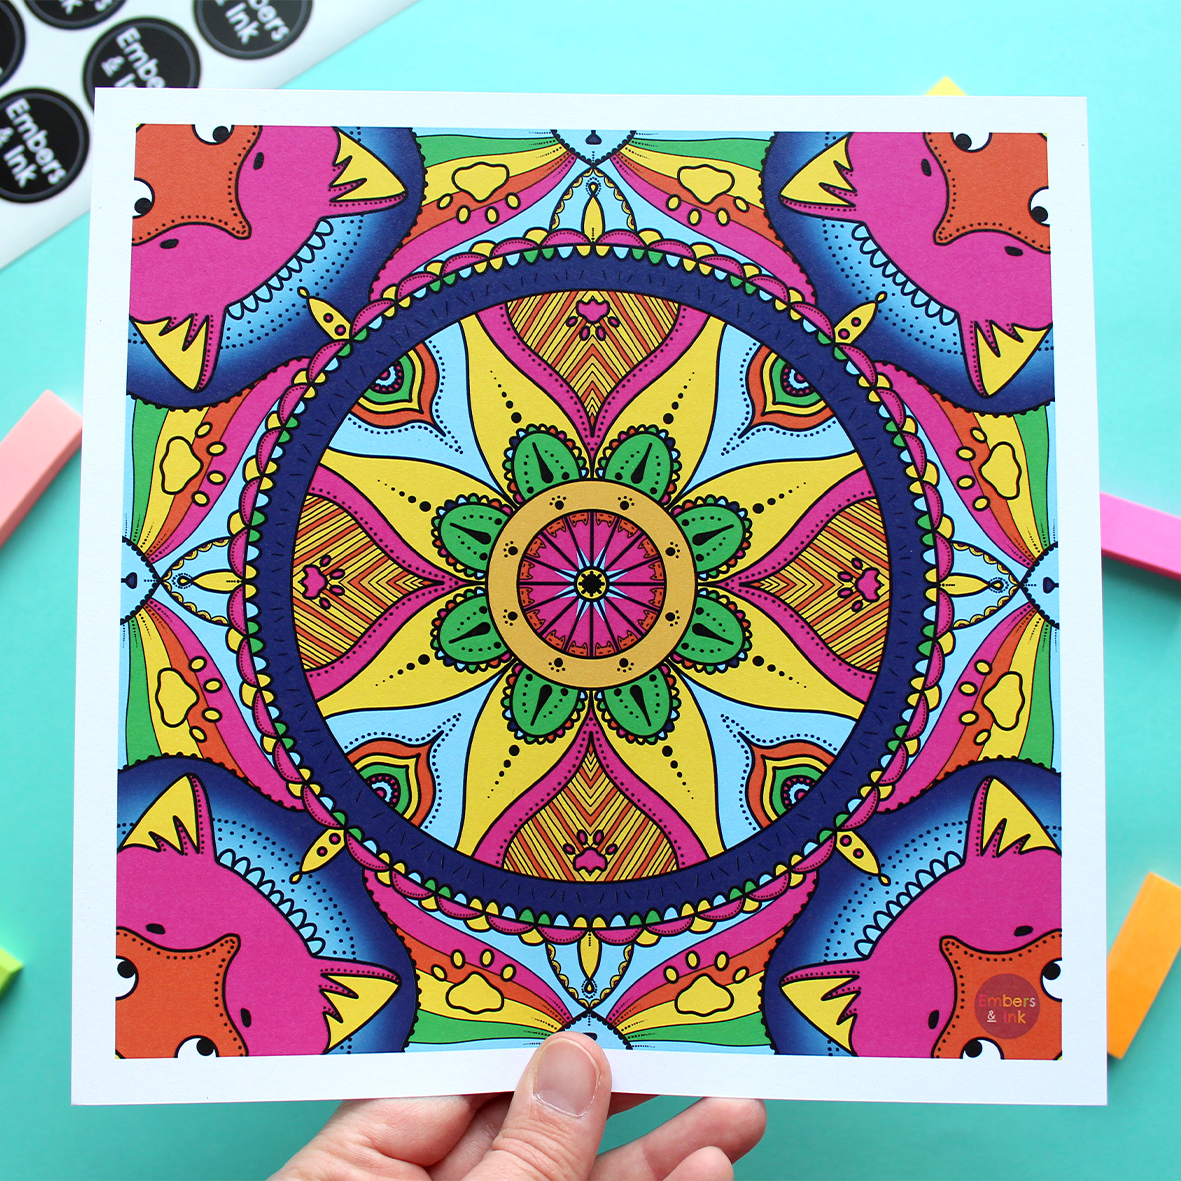 A colourful square art print is shown against a turquise background. The print is a colourful mandala repeating pattern featuring feline things, like cat noses, whiskers, paws, ears and more all hidden in the patternn